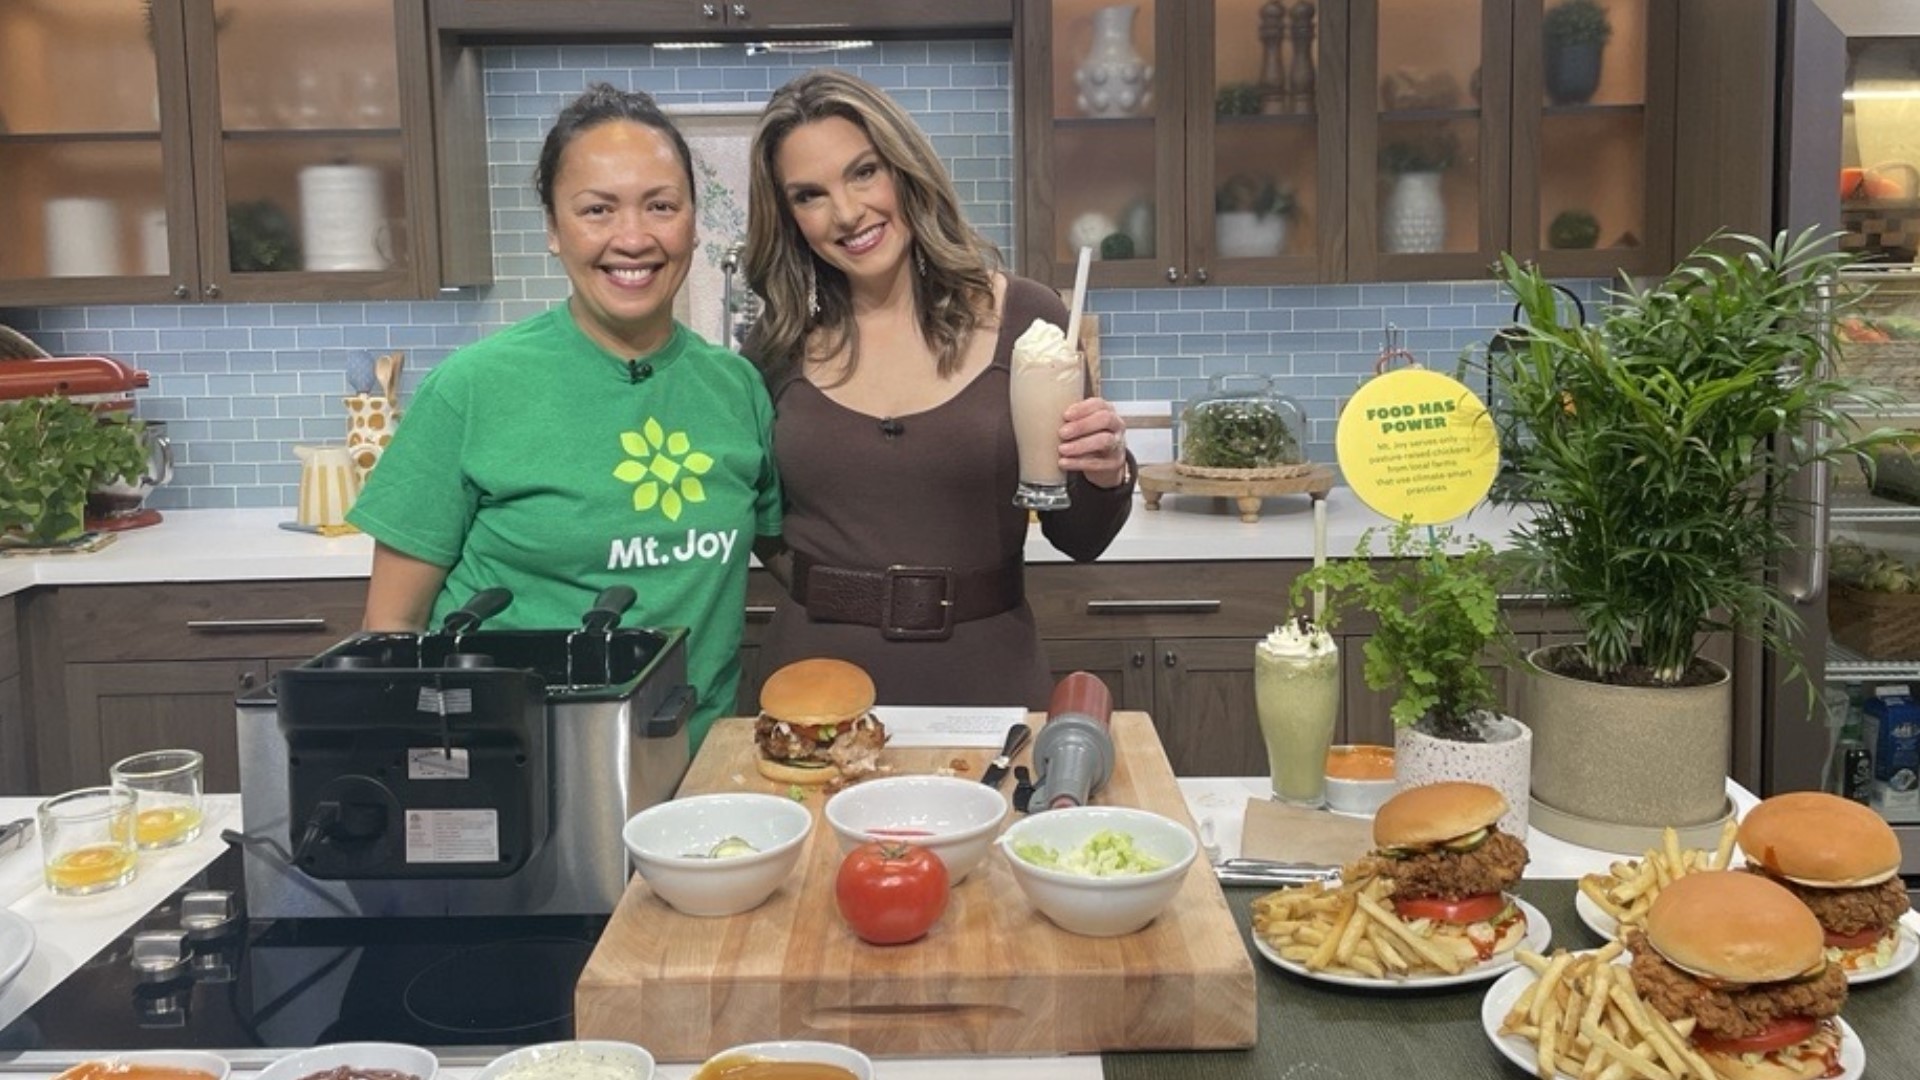 Dionne Himmelfarb from Mt. Joy shares their mission to make delicious chicken sandwiches while also using climate smart practices to grow chicken. #newdaynw